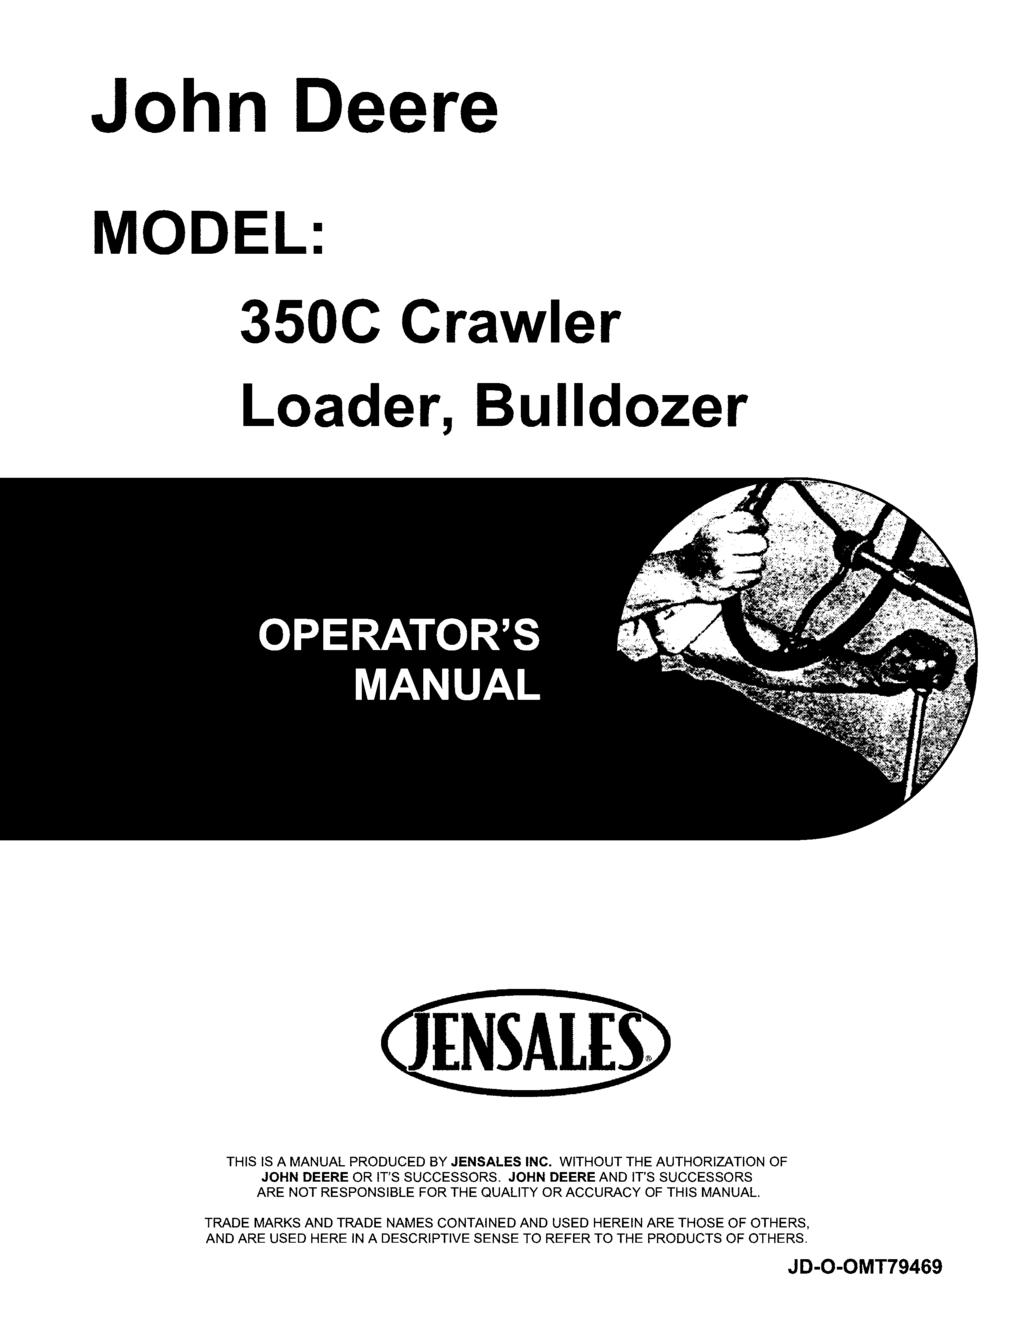 John Deere MODEL: 350C Crawler Loader, Bulldozer THIS IS A MANUAL PRODUCED BY JENSALES INC. WITHOUT THE AUTHORIZATION OF JOHN DEERE OR IT'S SUCCESSORS.